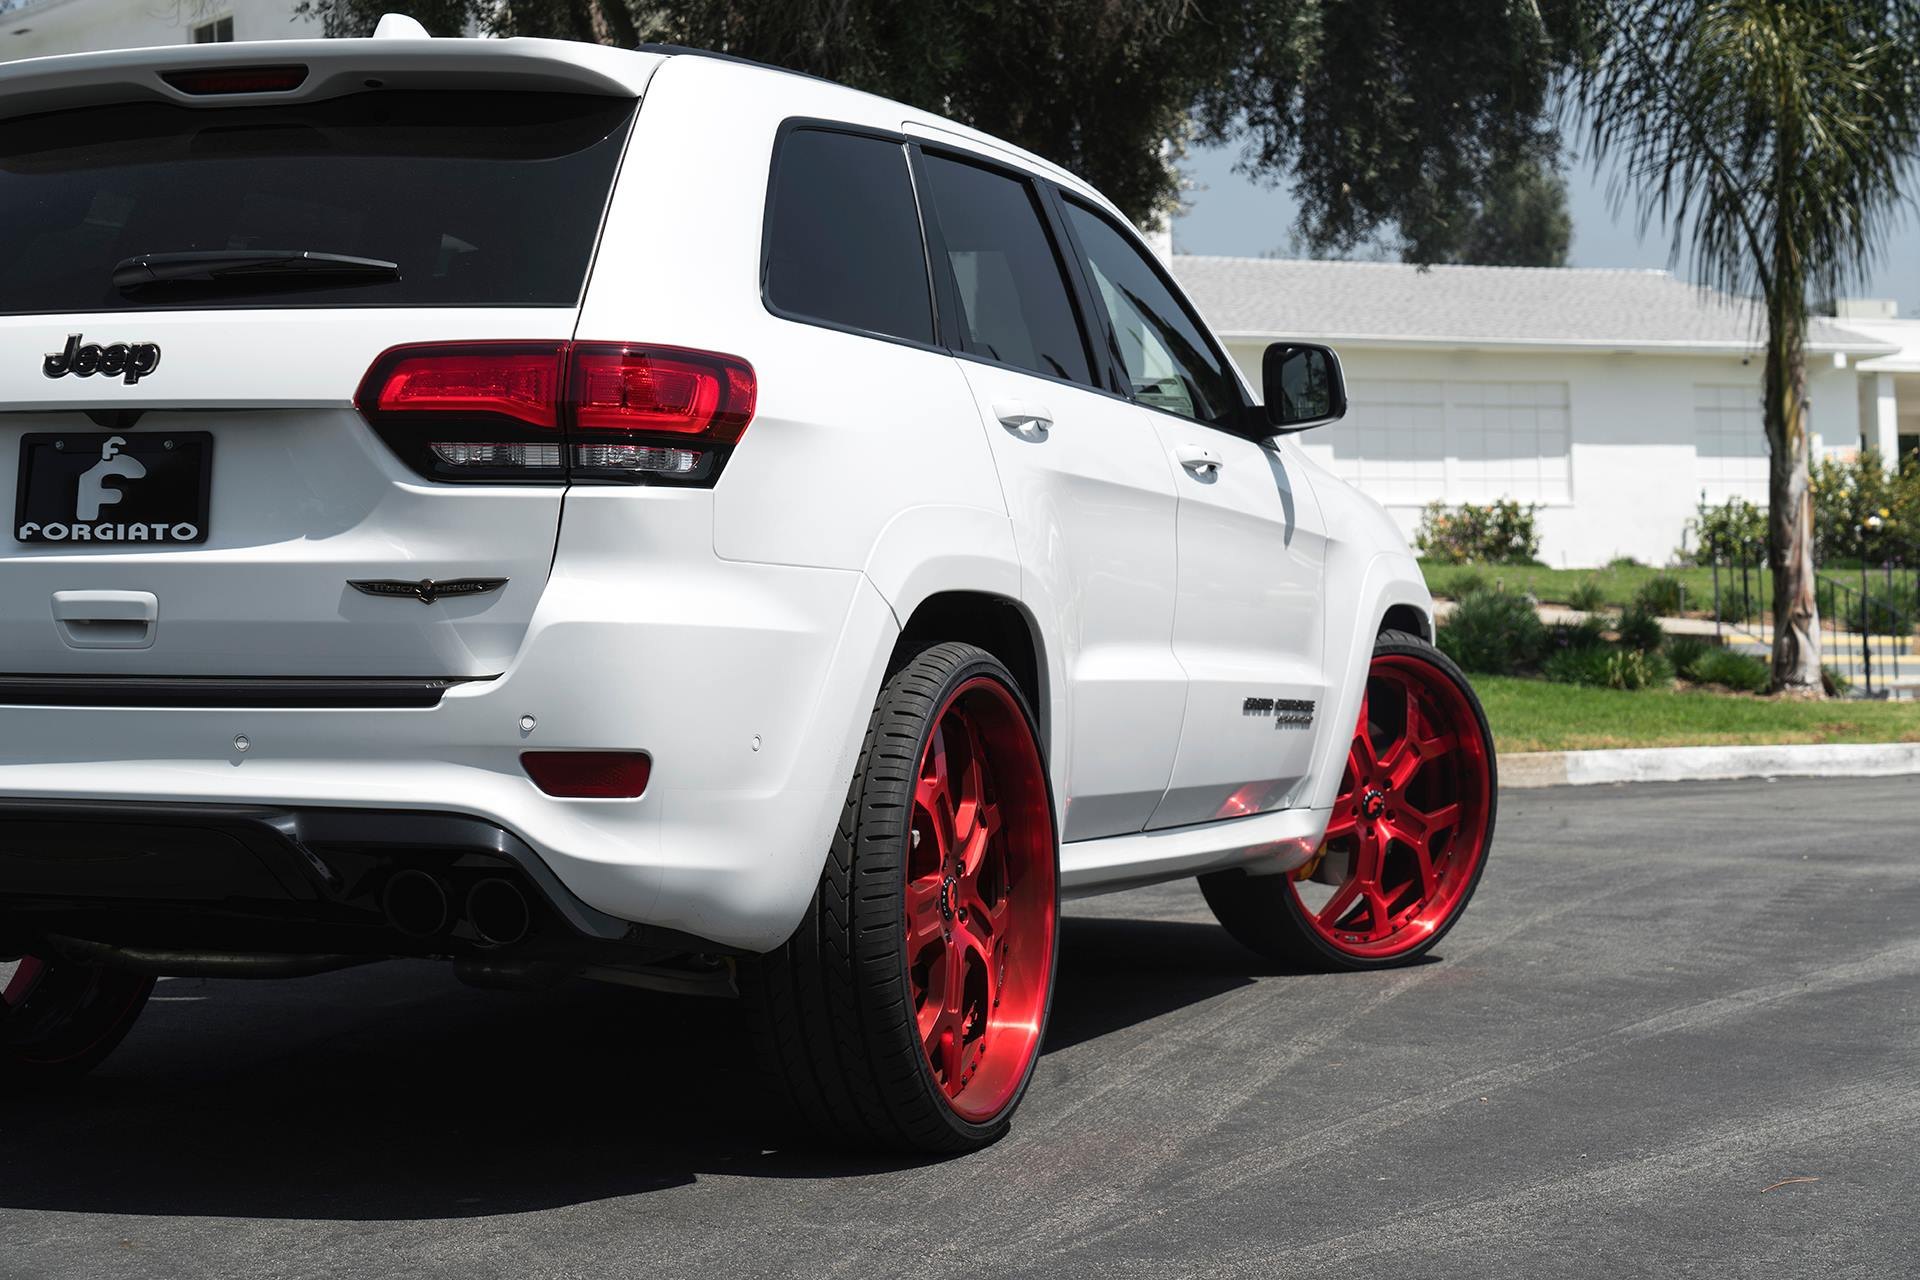 Aftermarket Rear Diffuser on White Jeep Grand Cherokee - Photo by Forgiato